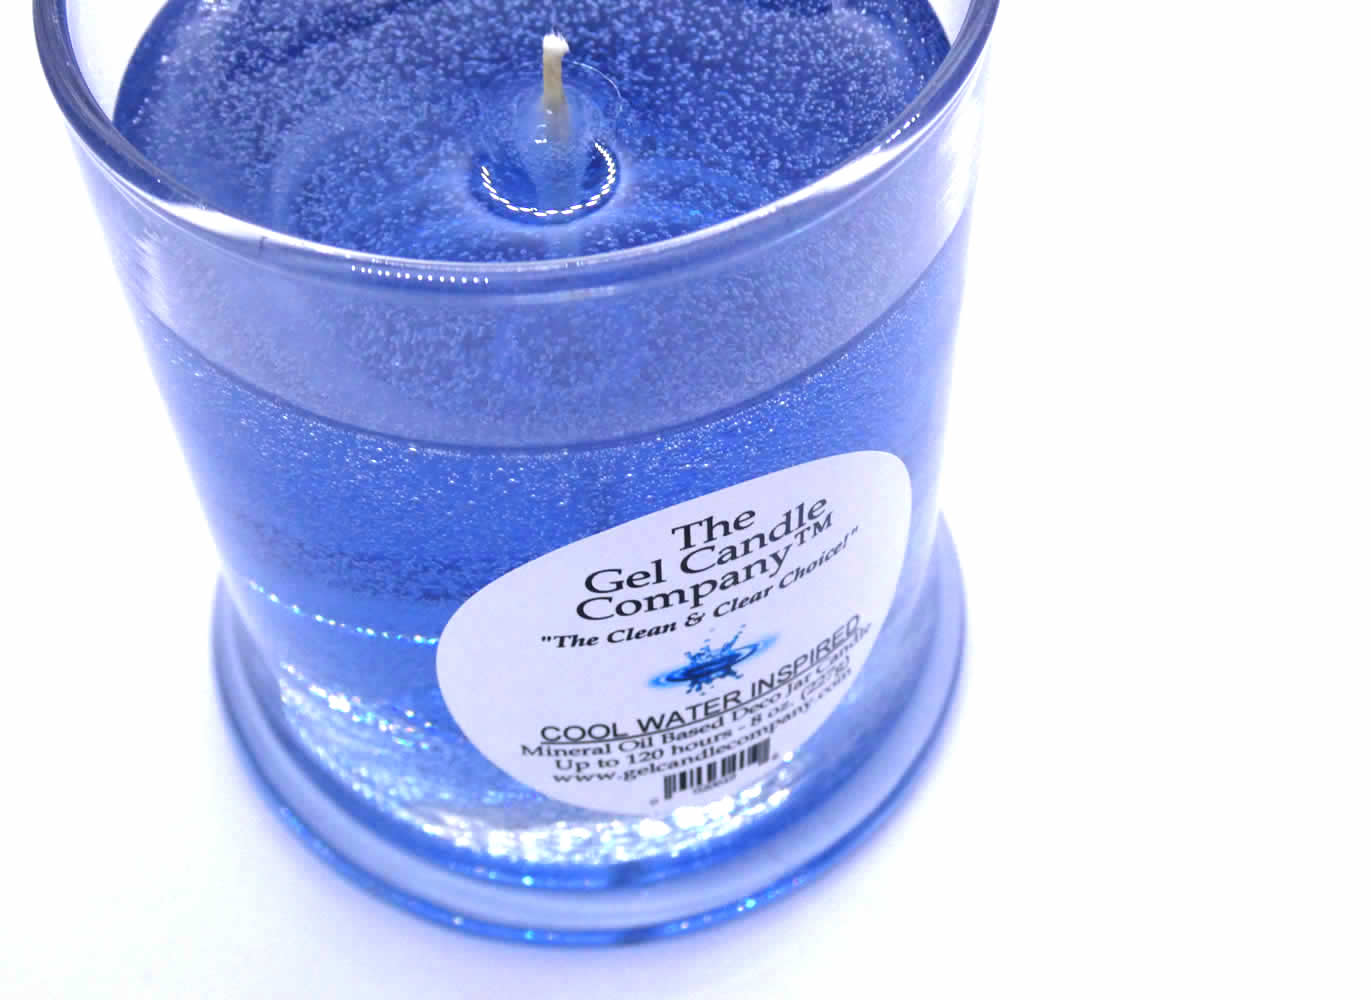 Cool Water Inspired Scented Gel Candle up to 120 Hour Deco Jar - Click Image to Close